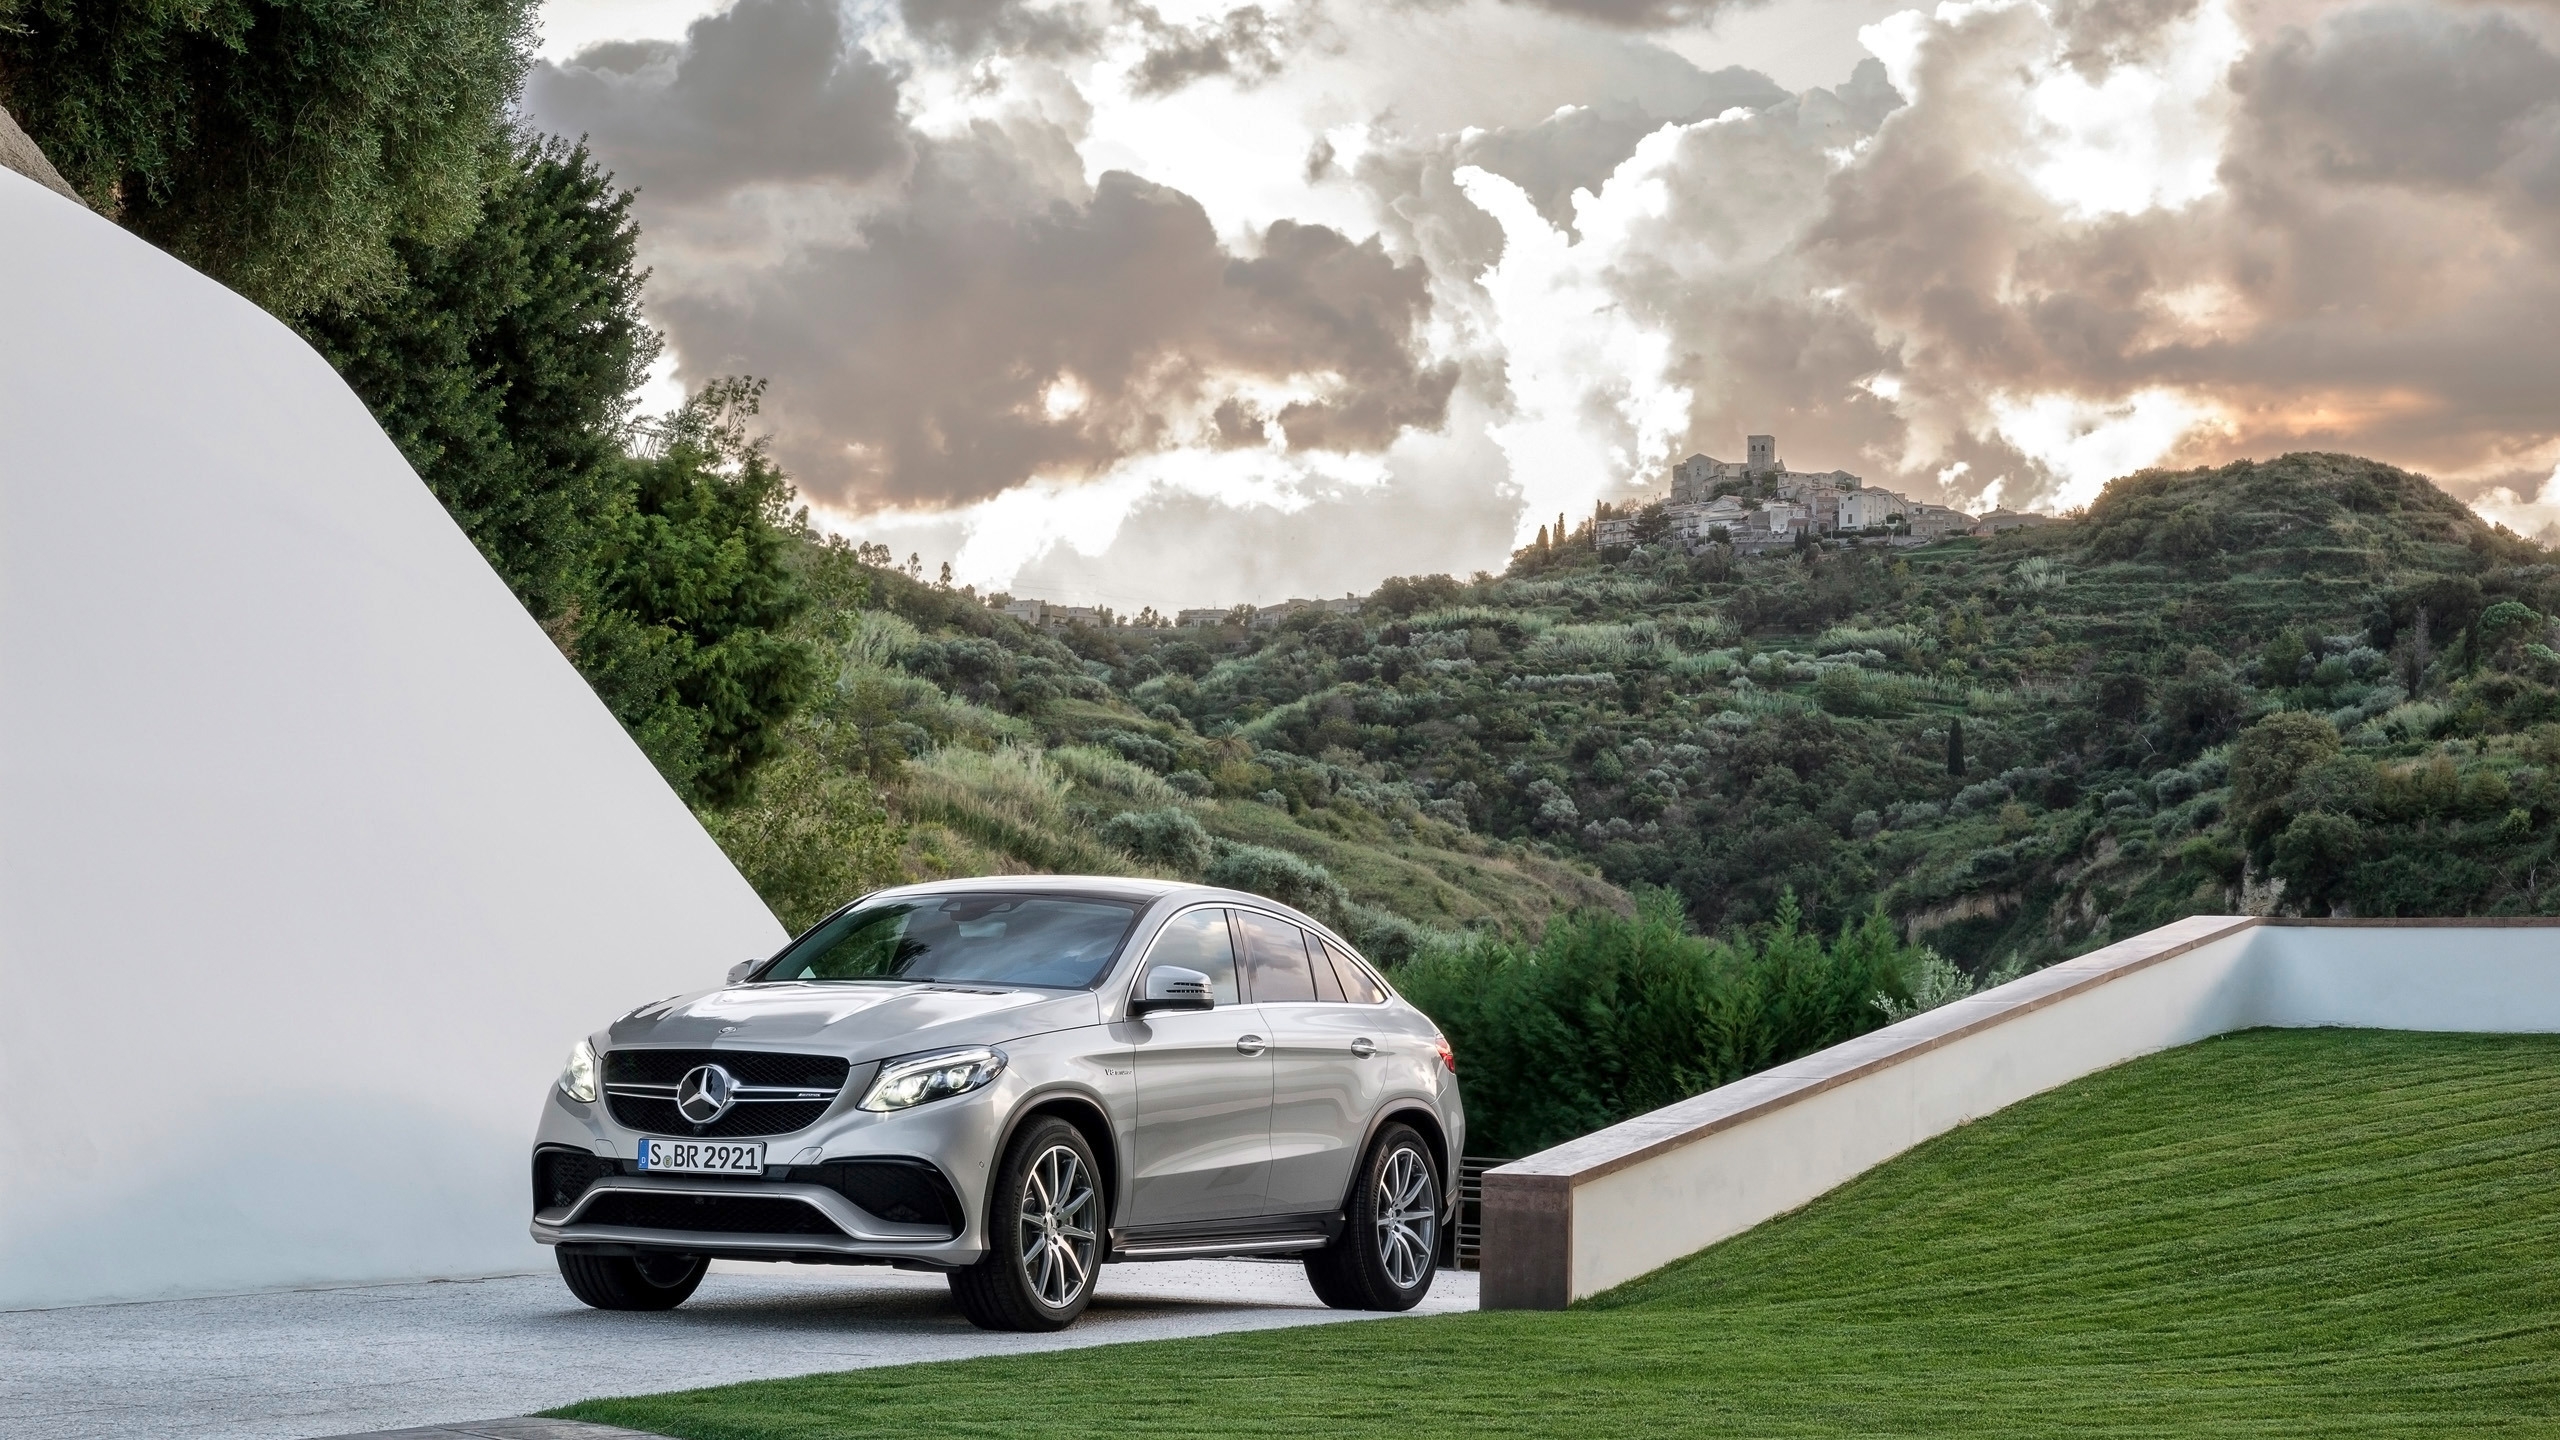 2015 Mercedes-AMG GLE 63 Coupe for 2560x1440 HDTV resolution